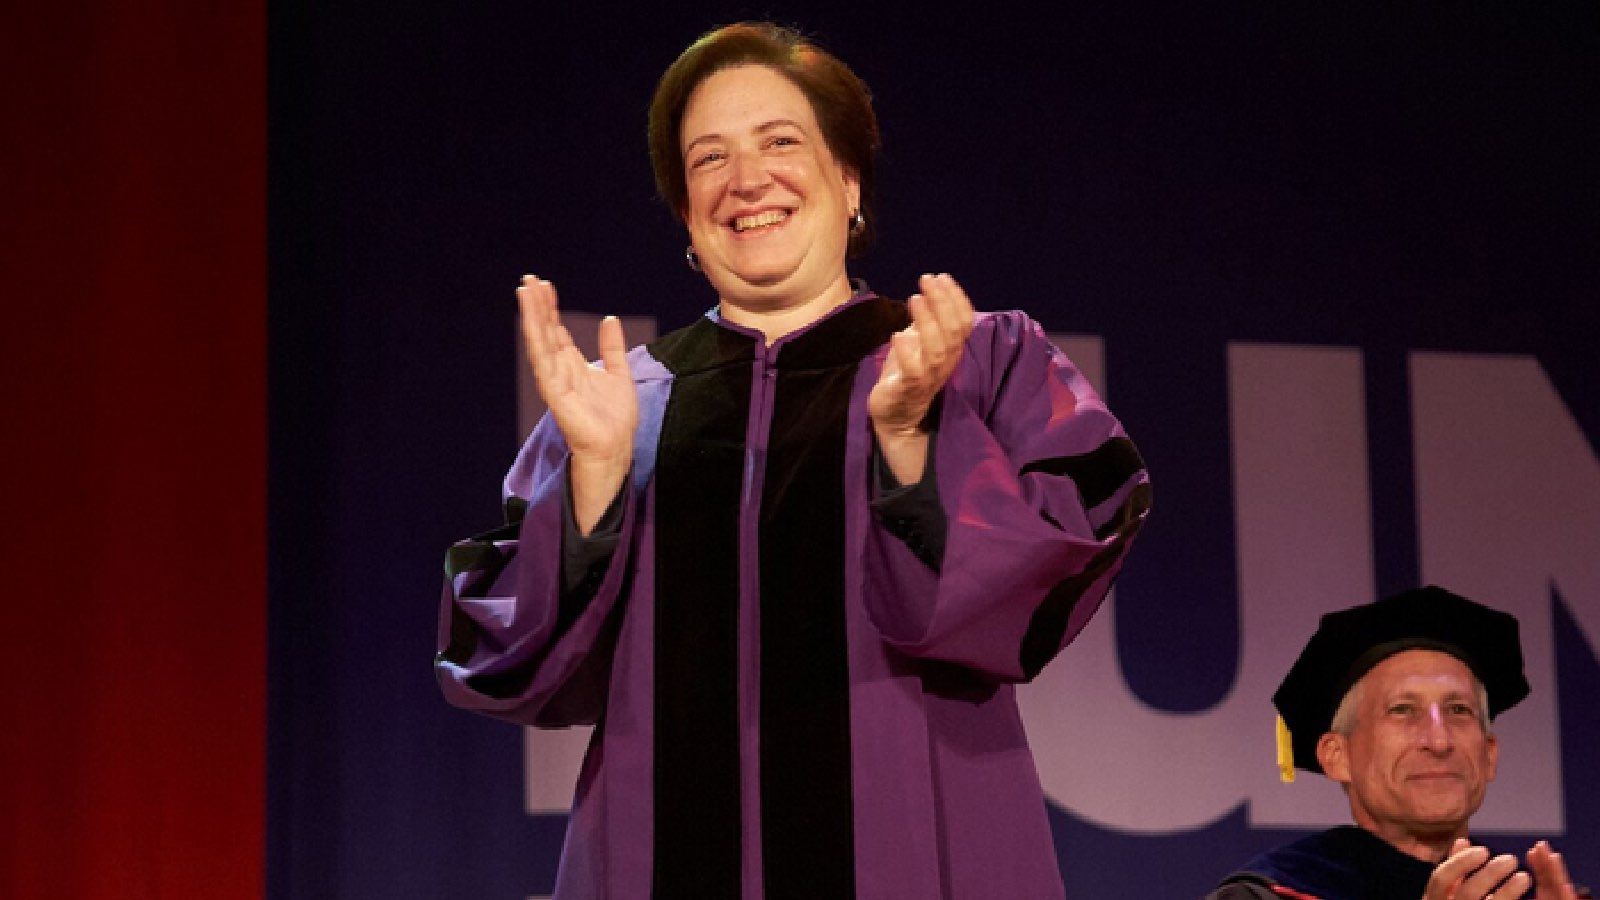 Supreme Court Justice Elena Kagan receives Honorary Doctorate of Humane Letters